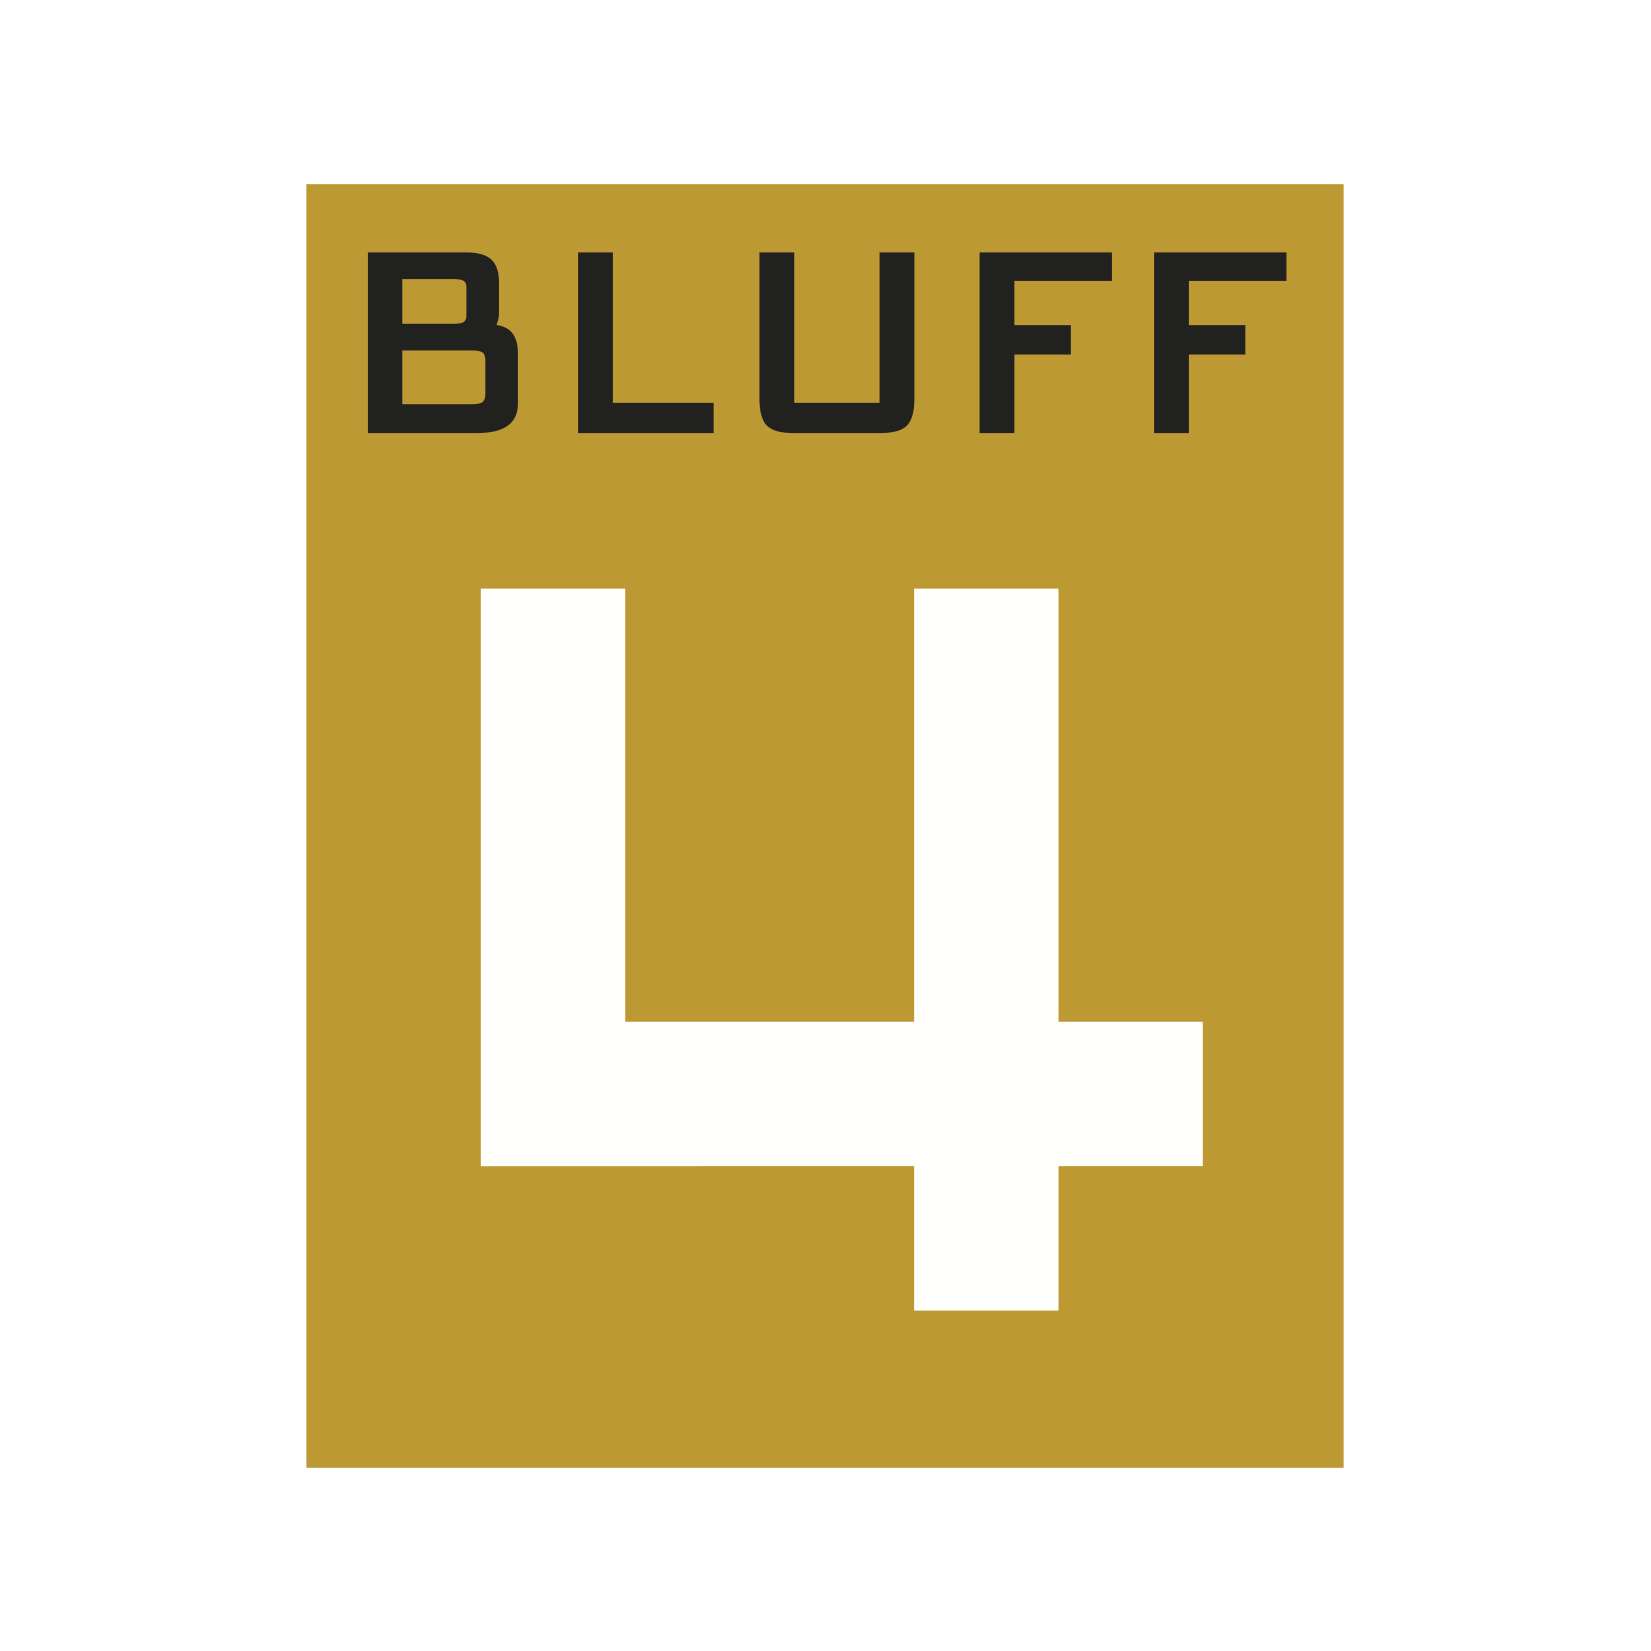  Bluff 4 corporate logo  Naming, branding creative and design by Chuck Mitchell 